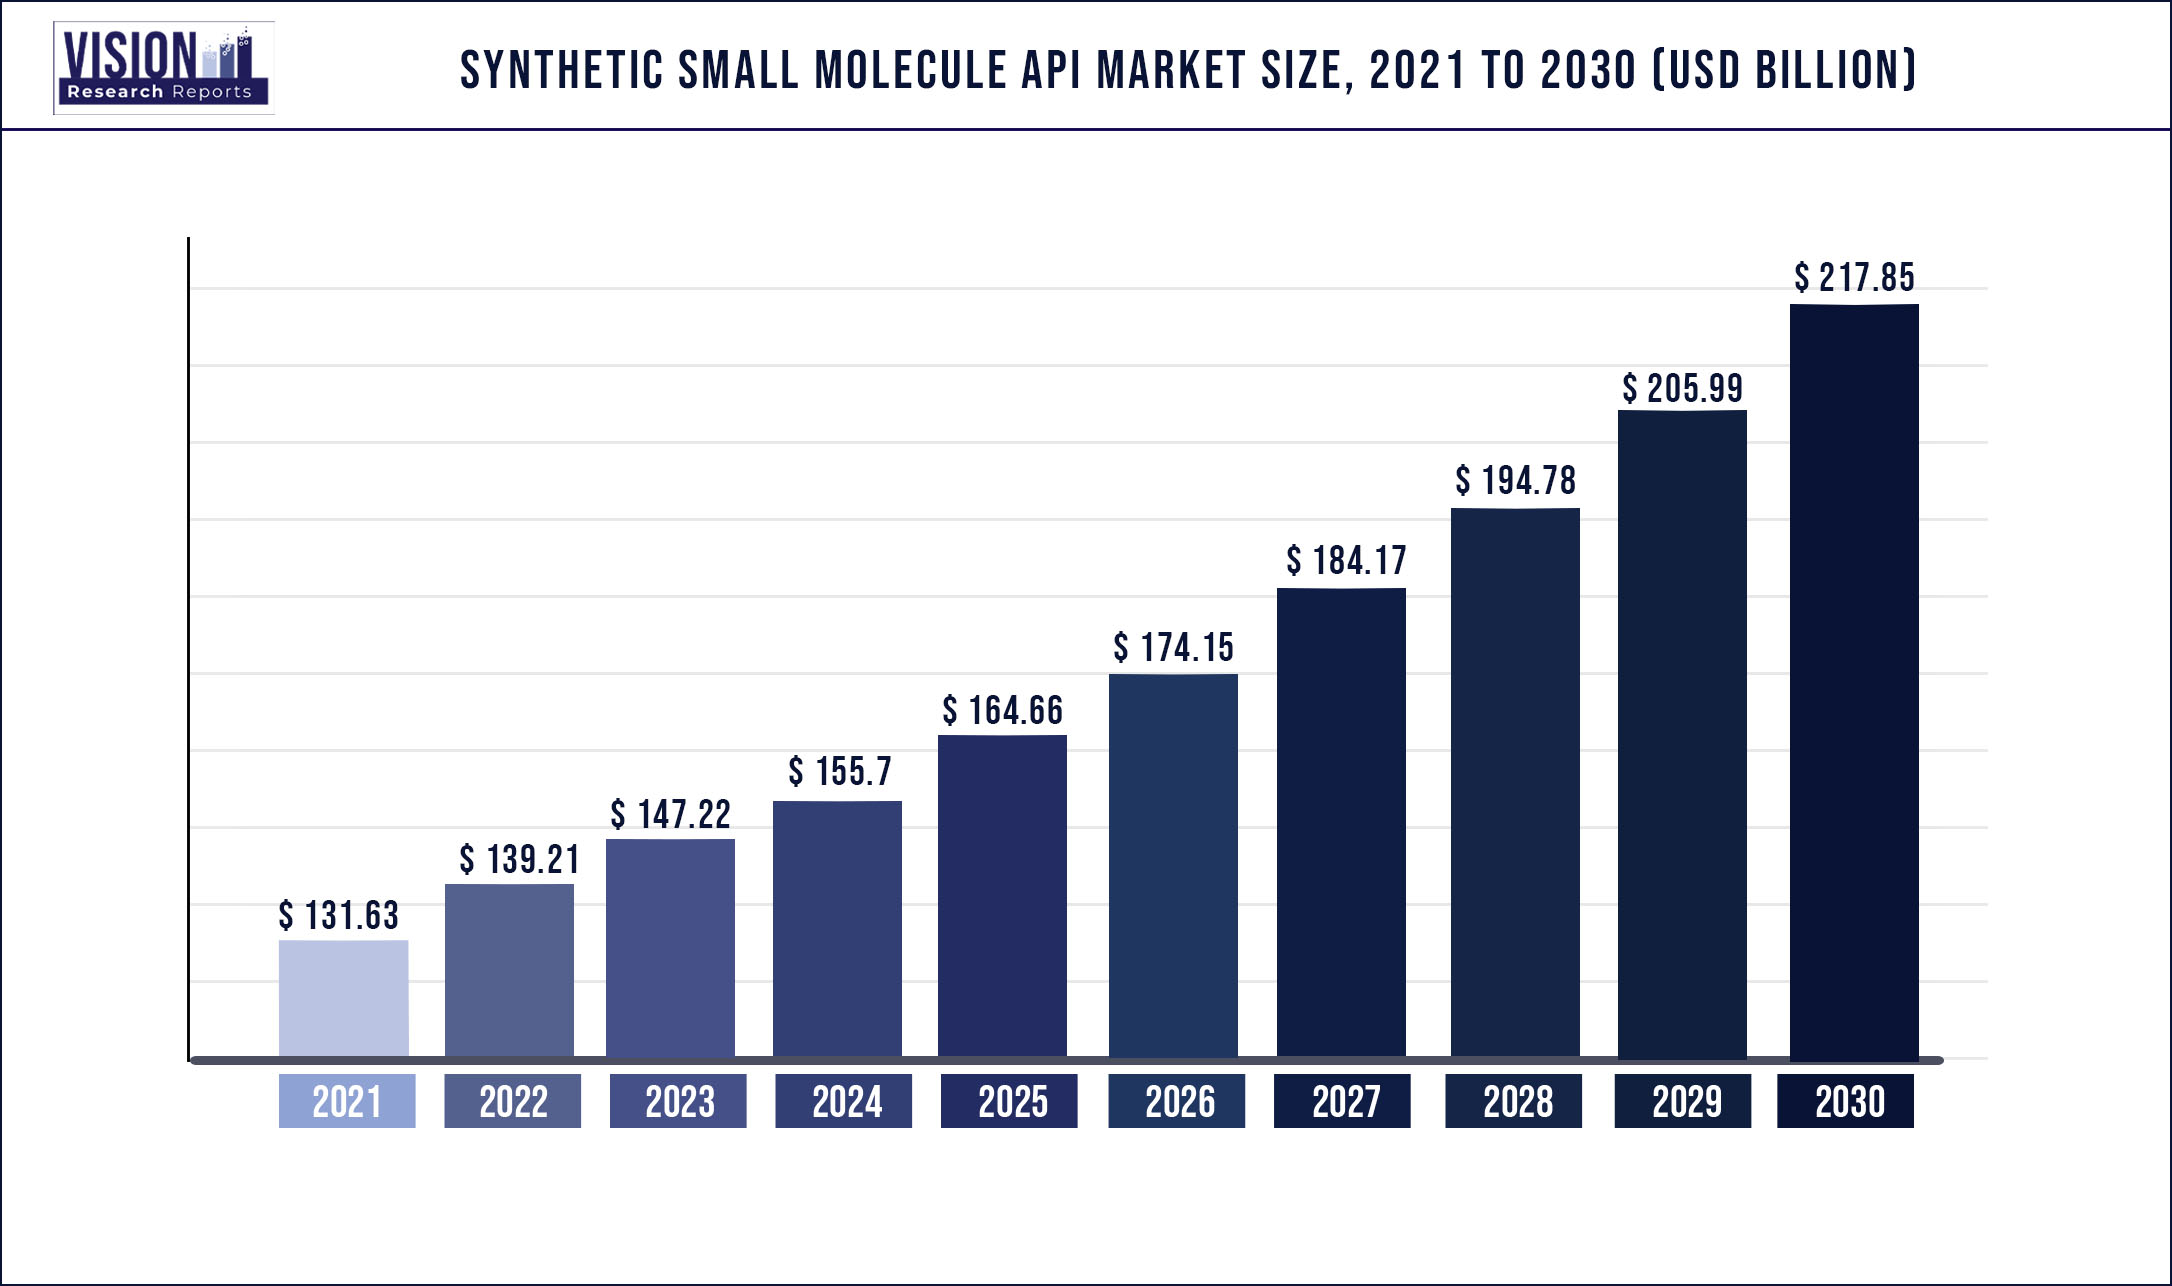 Synthetic Small Molecule API Market Size 2021 to 2030